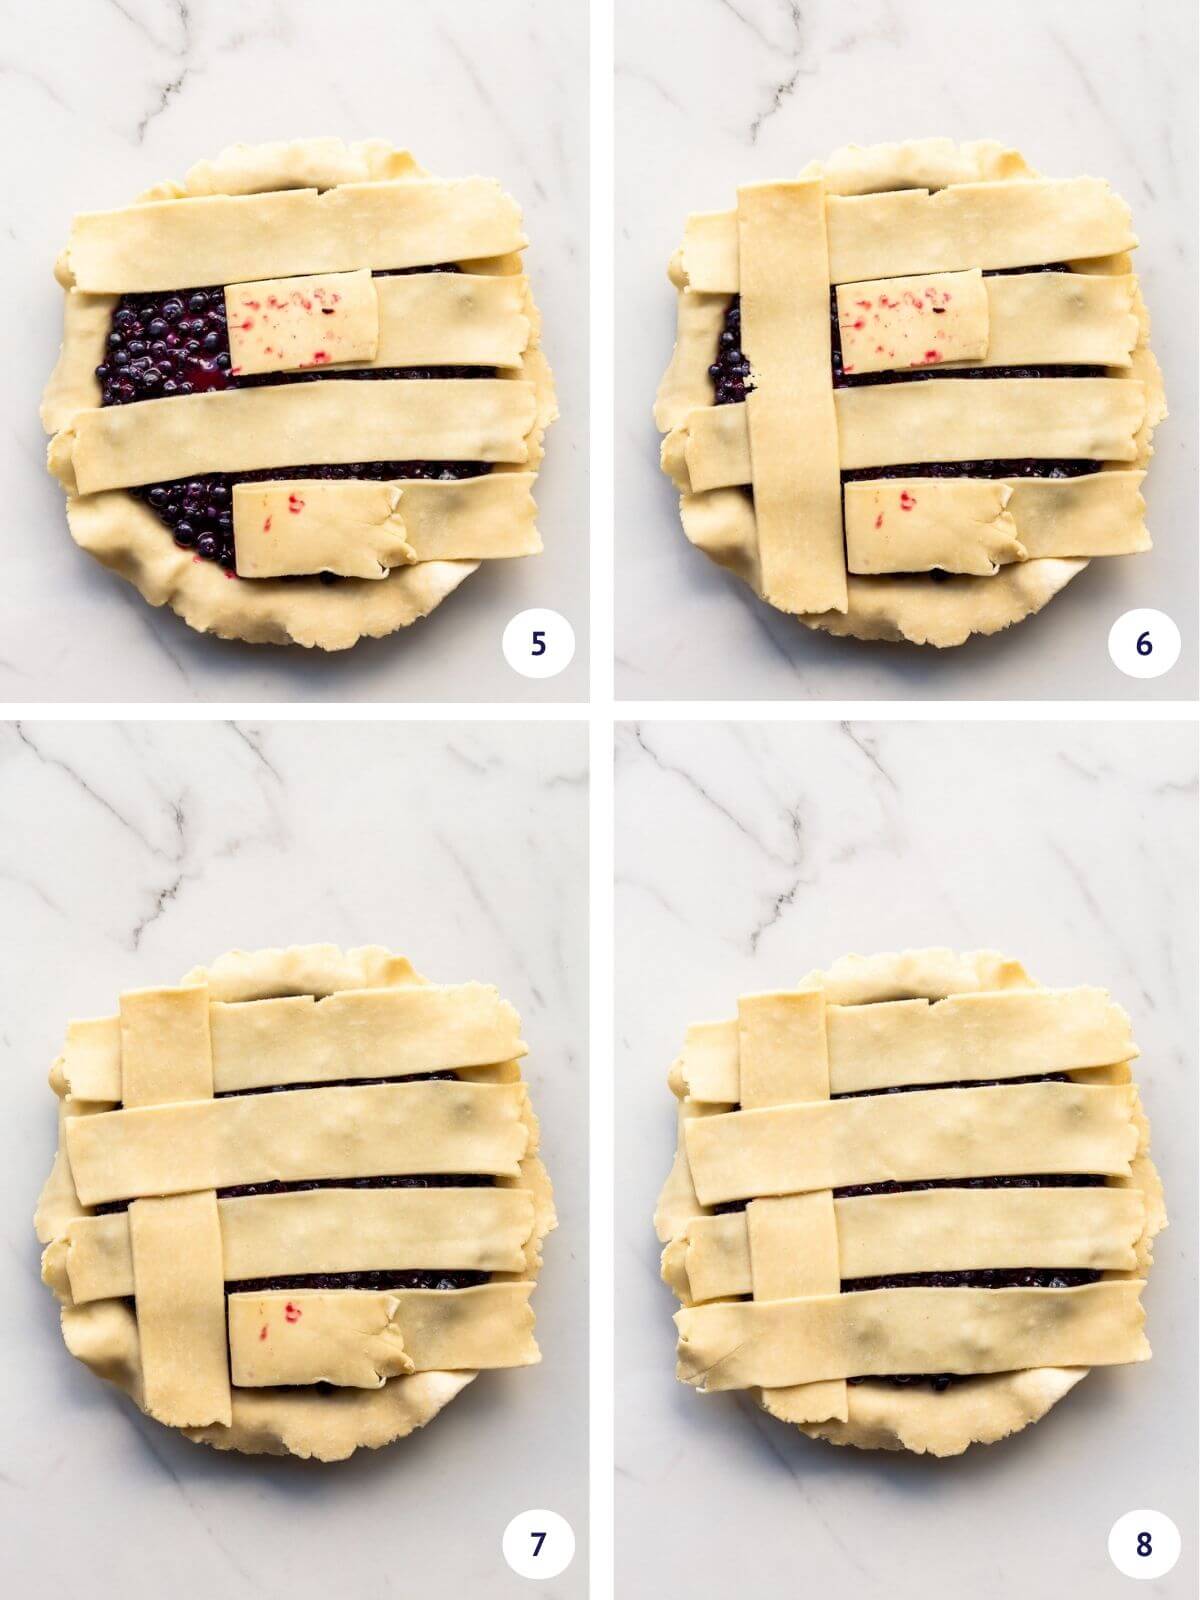 Collage to show weaving in first vertical strip of a fat lattice with 7 strips of pie dough.